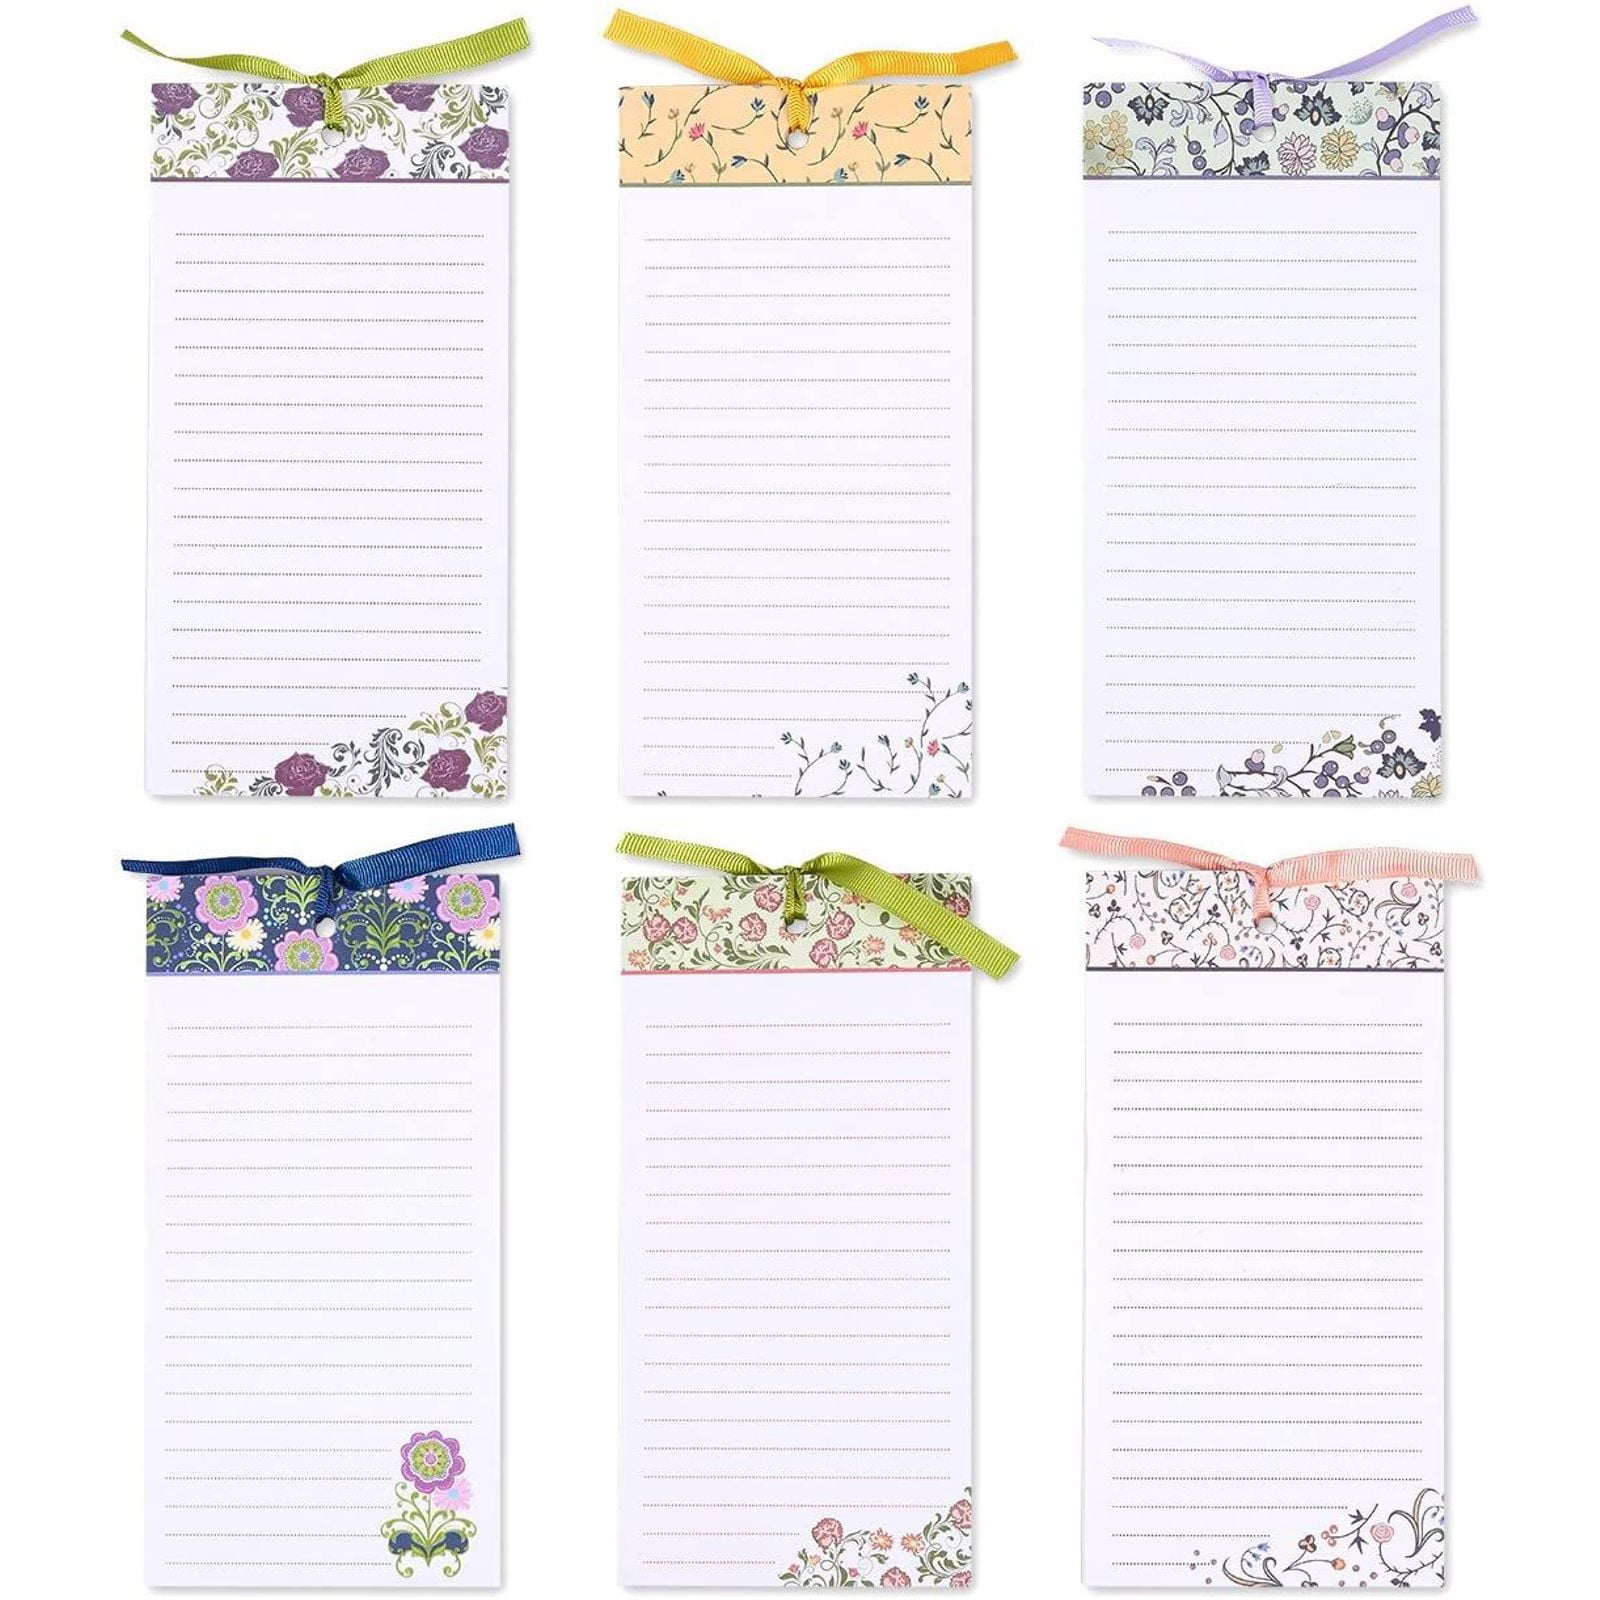 To-Do-List Notepad – 6-Pack Magnetic Notepads To Do List Fridge Grocery List Magnet Memo Pad for Shopping House Chores Reminders Assorted Flower Designs 60 Sheets Per Pad 4 x 8 Inches